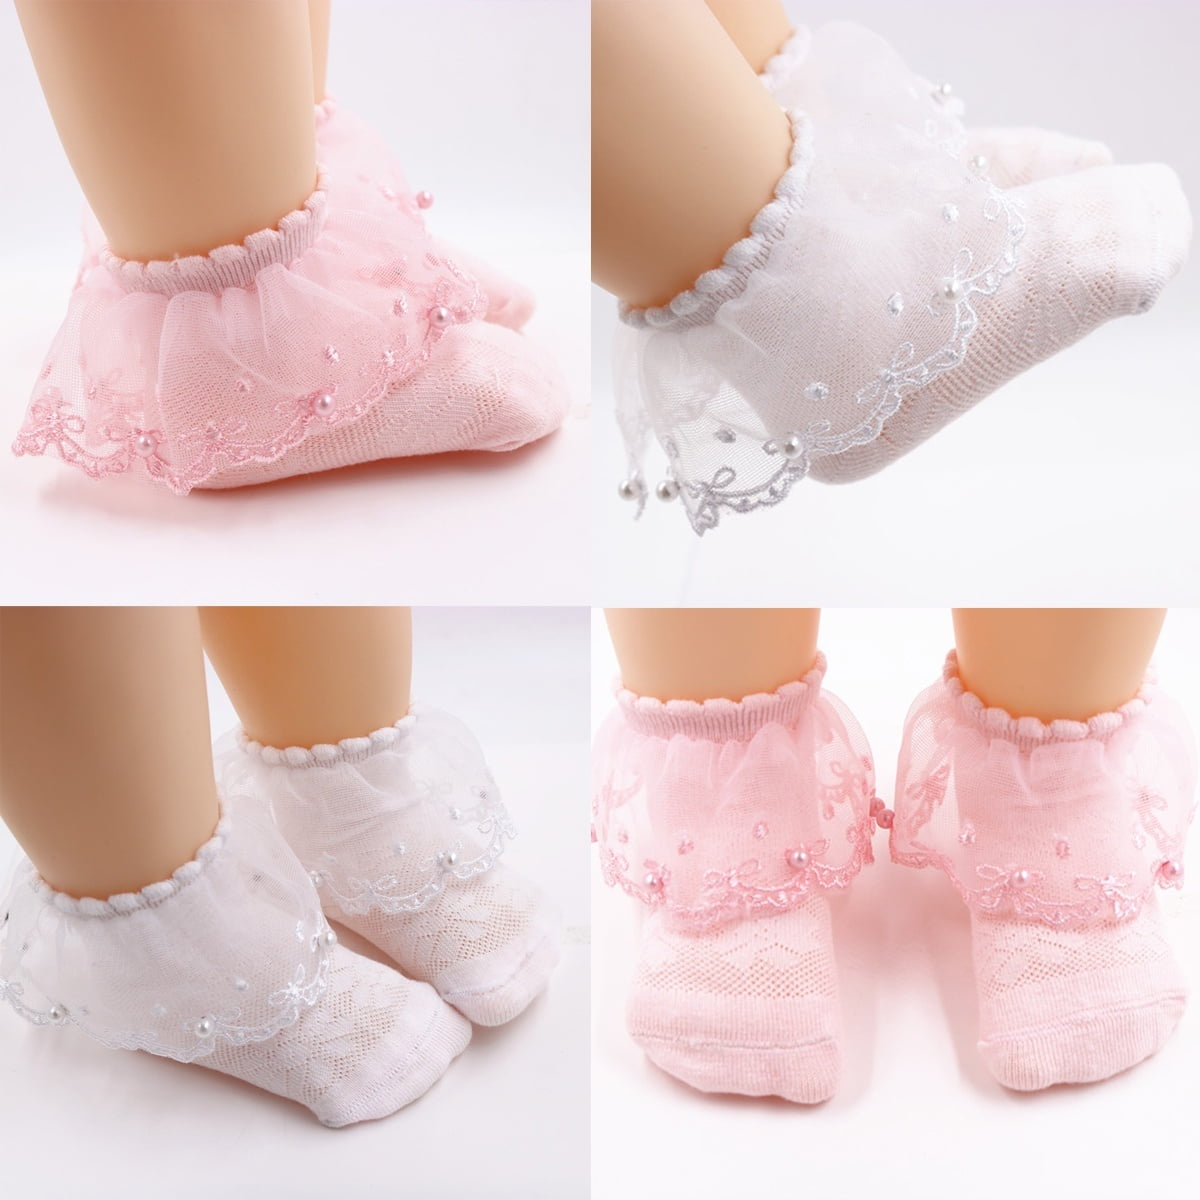 Cute Girls Frilly Lace Ankle Socks Low Cut Soft Cotton Socks for Baby Kids Girls 